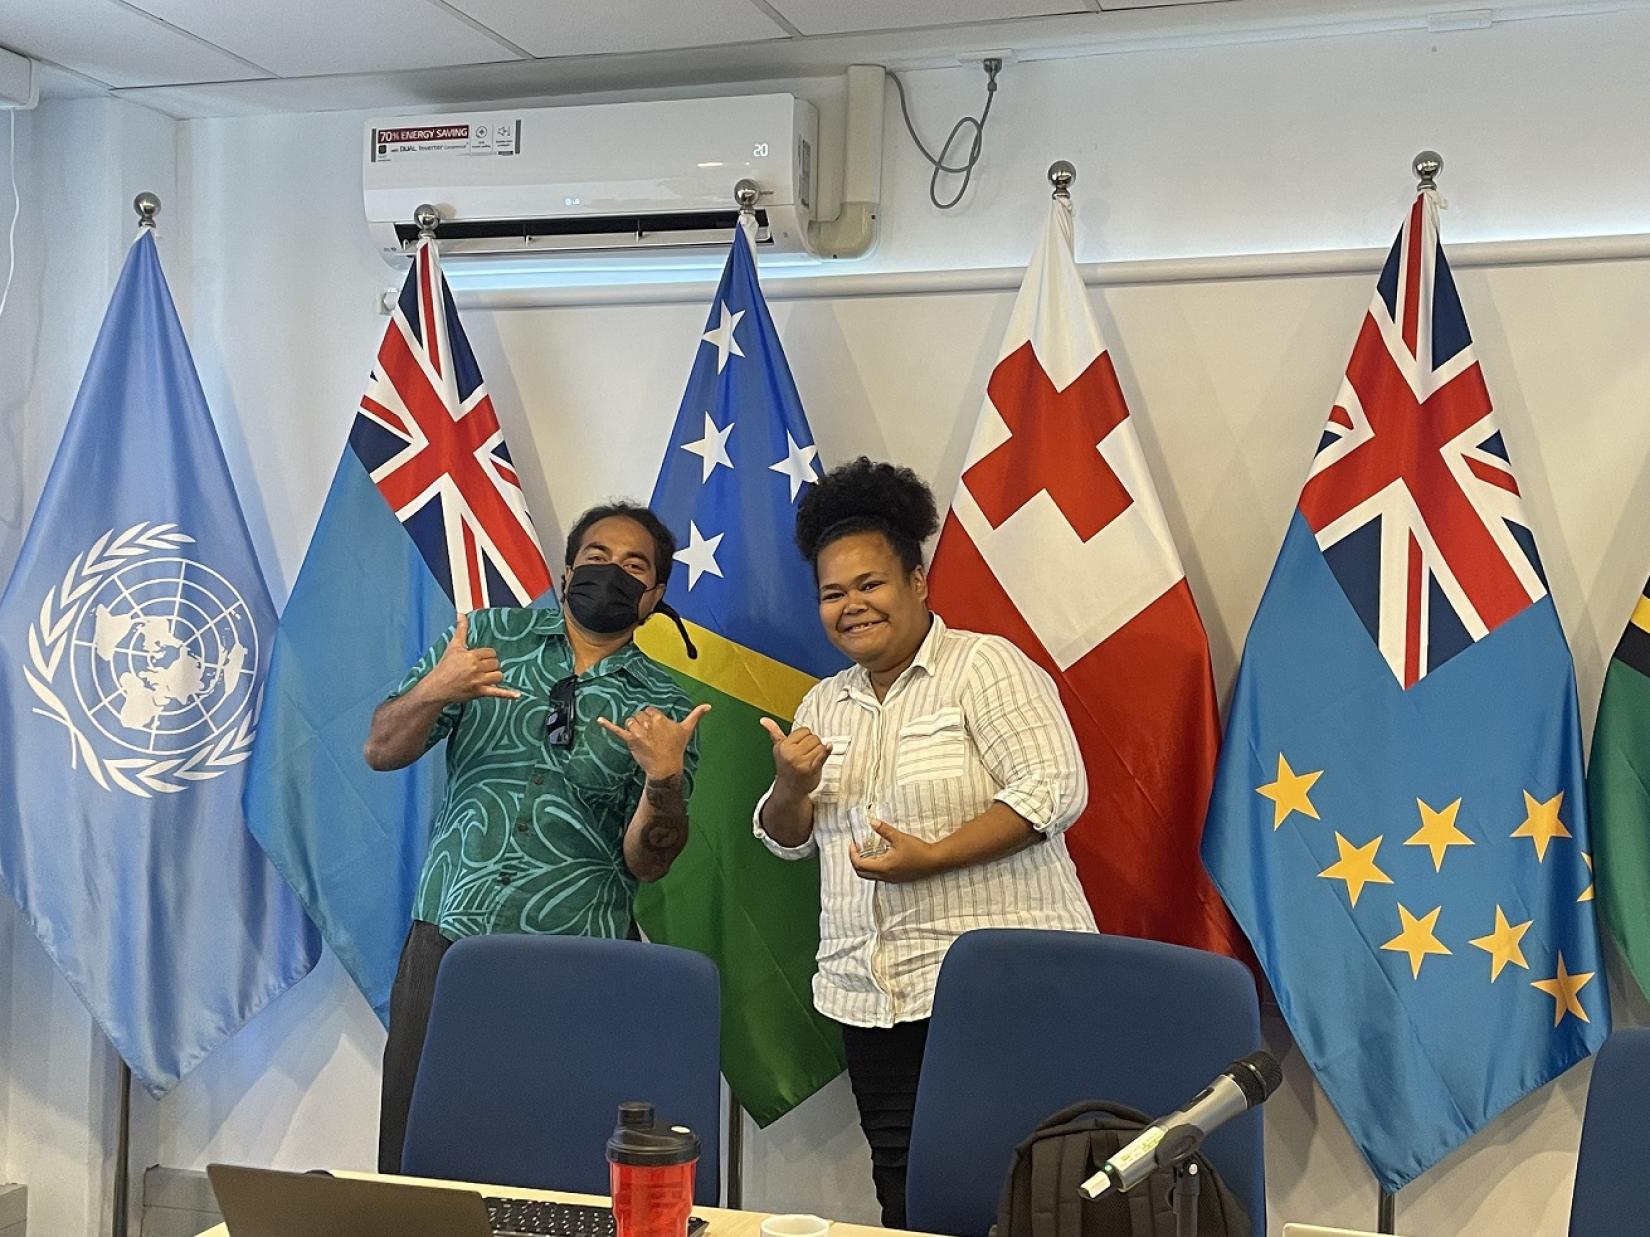 Staff from UN and the Pacific Disability Forum 